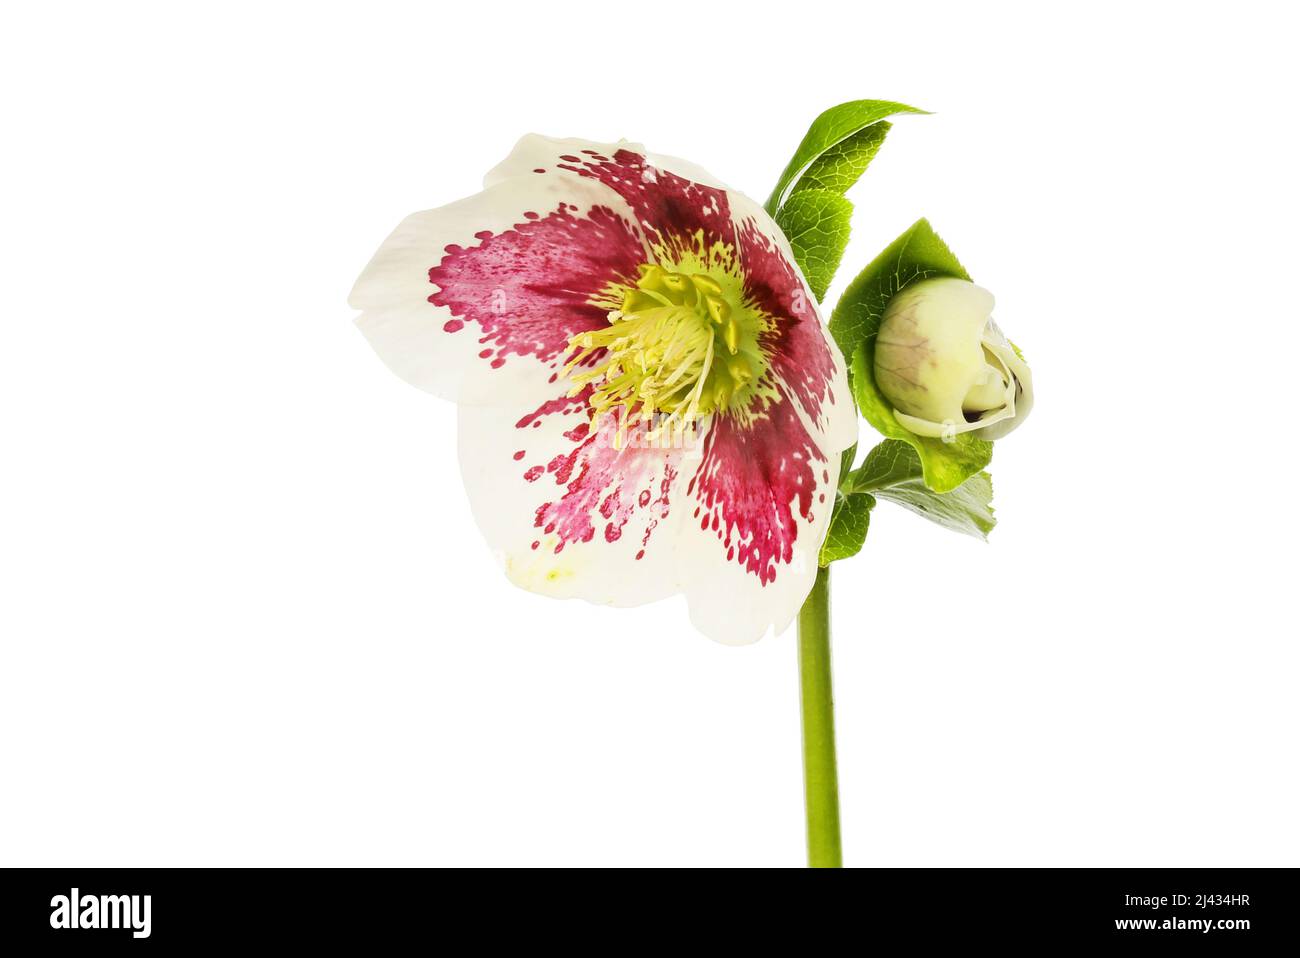 Hellebore flower and bud isolated against white Stock Photo